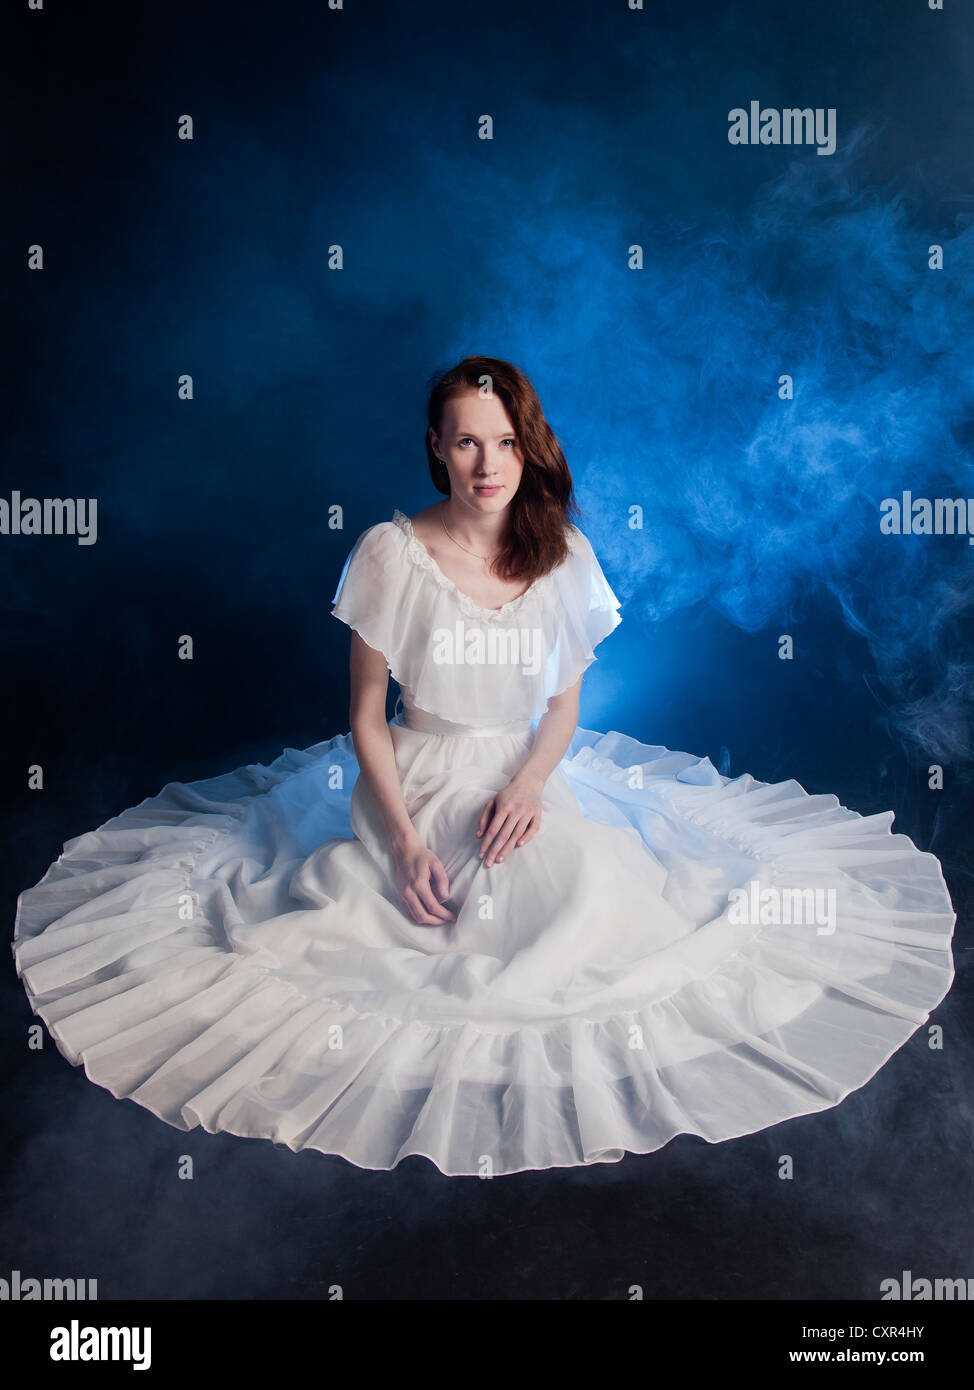 A young bride wearing wedding dress sitting on floor blue smoke around her. Stock Photo